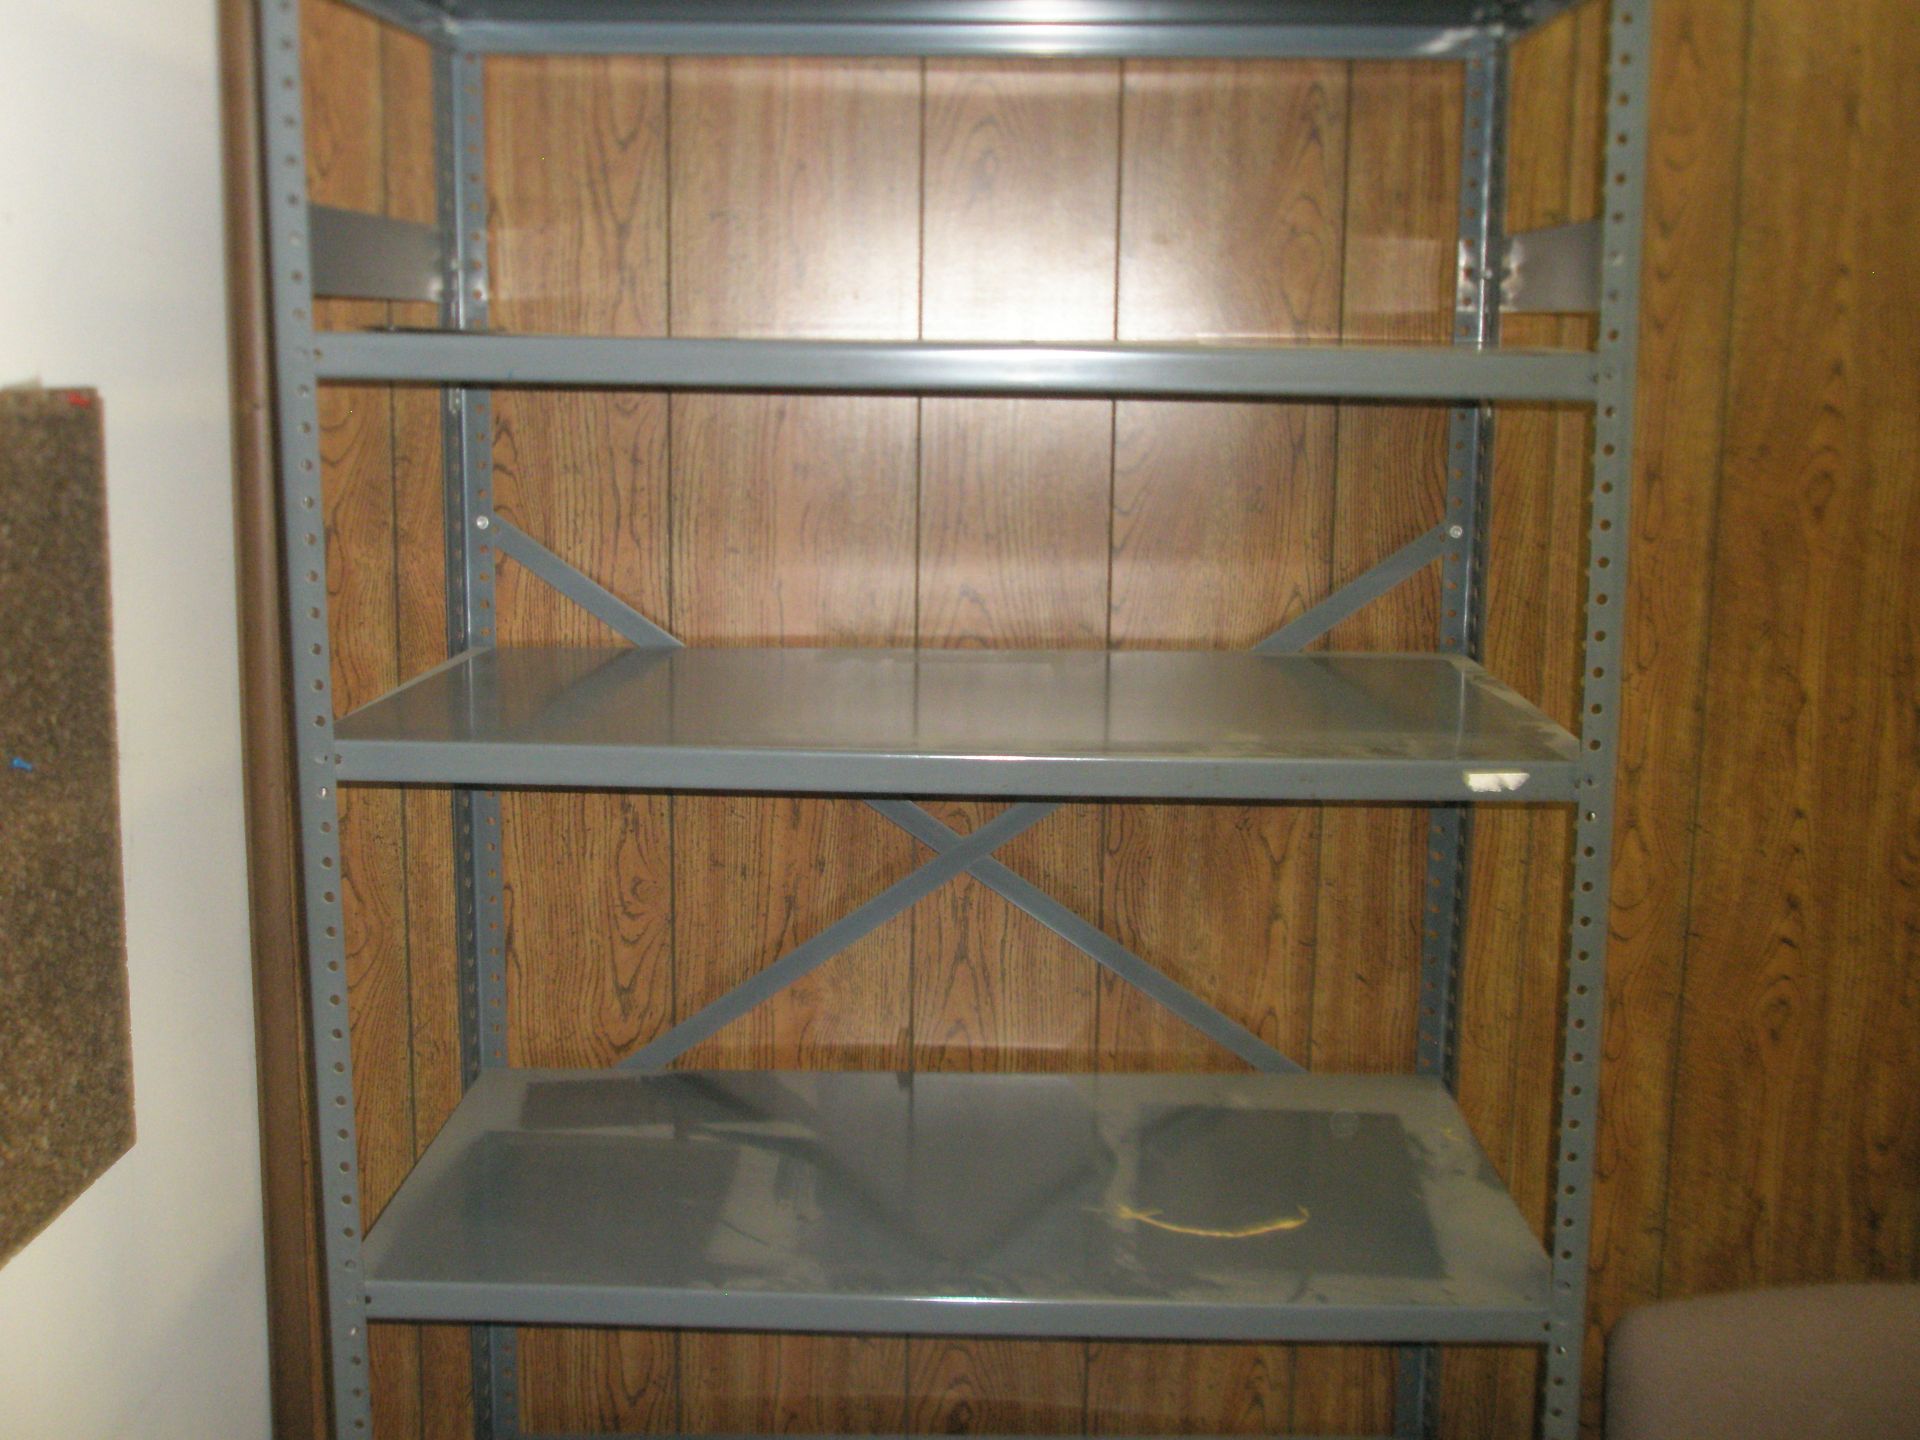 Sections of Metal Shelving - Image 2 of 2